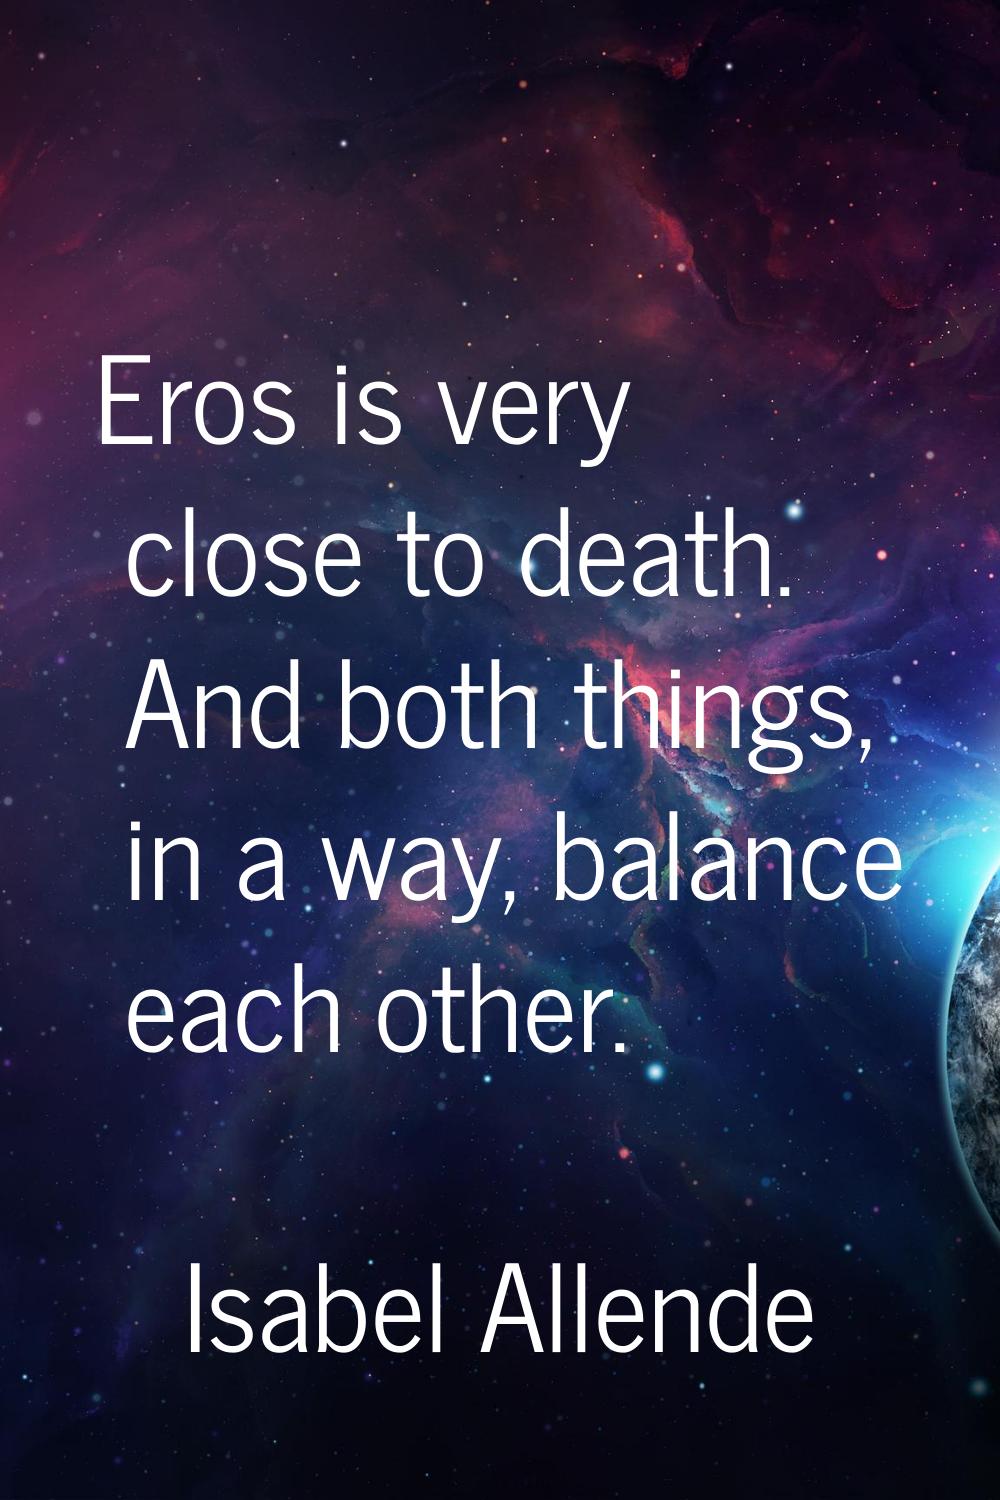 Eros is very close to death. And both things, in a way, balance each other.